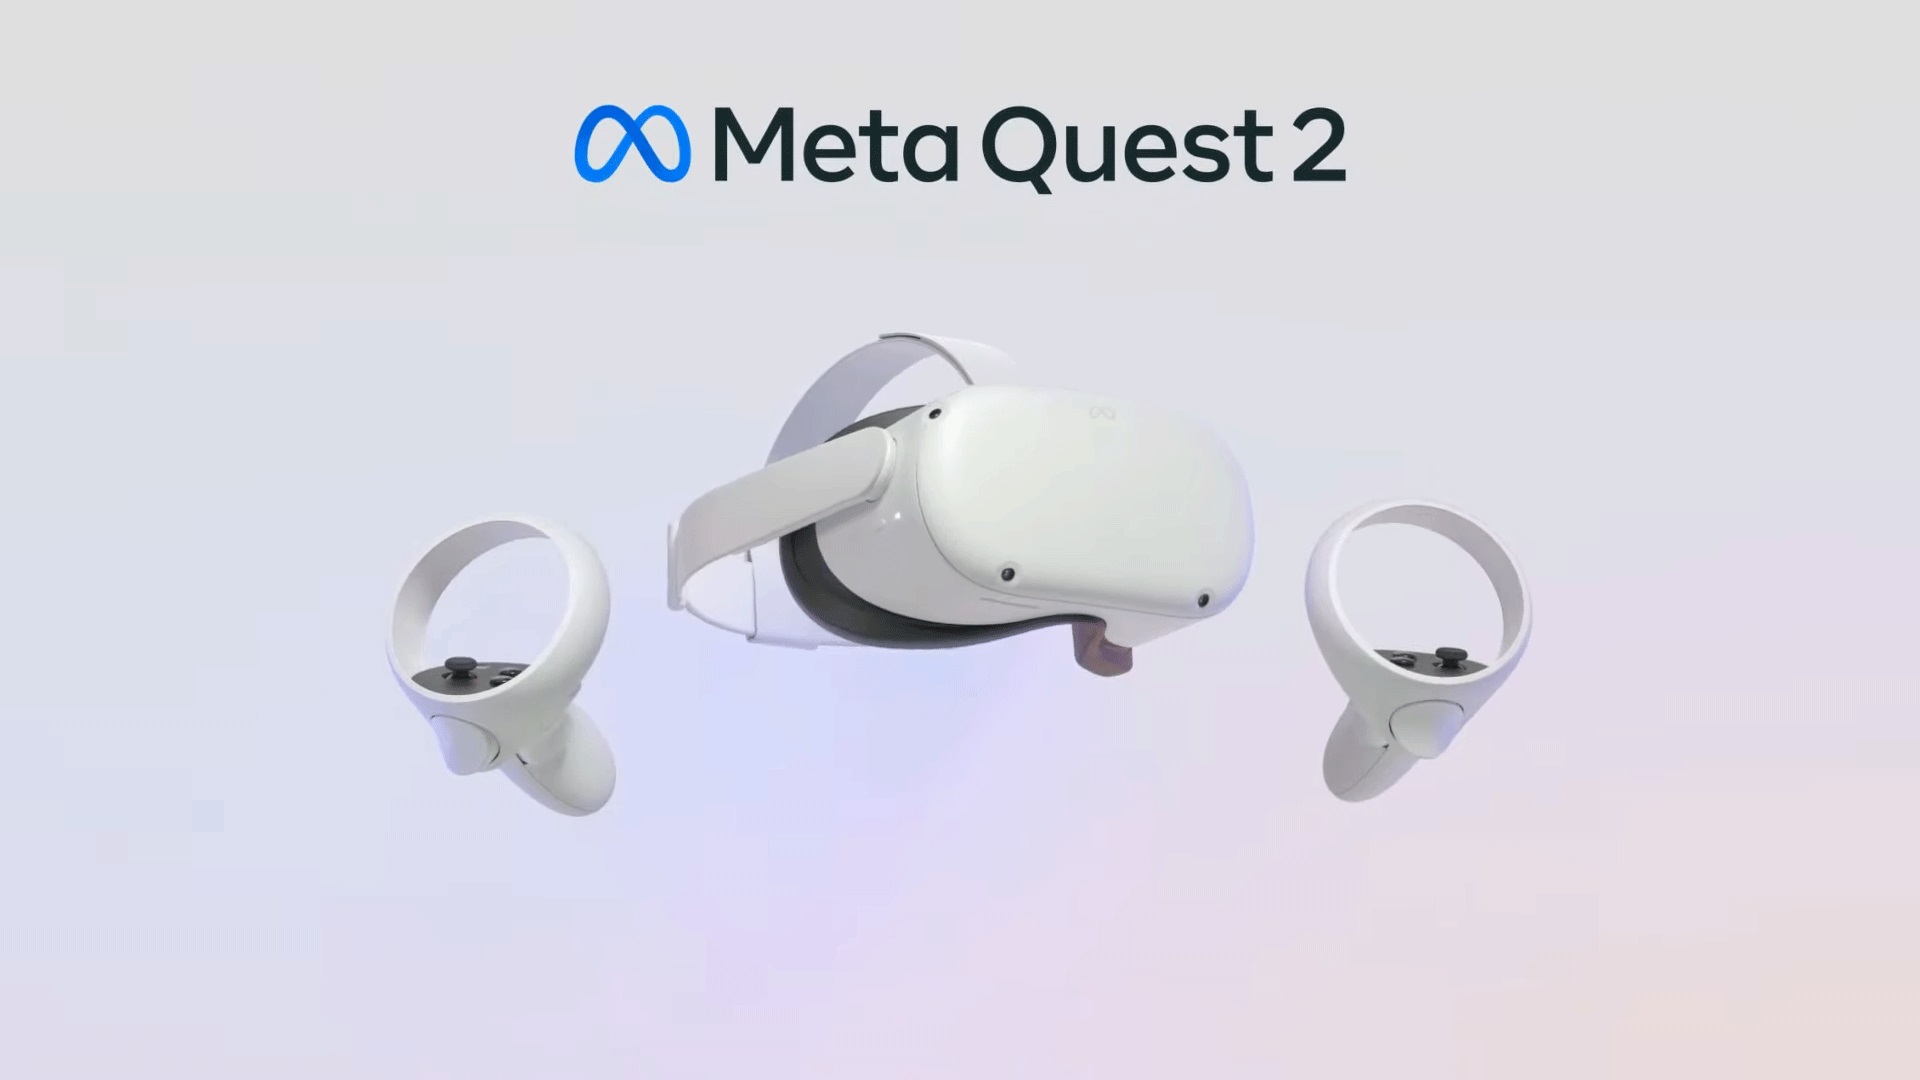 Meta Quest 2 is Getting a Significant Price Drop Starting June 4